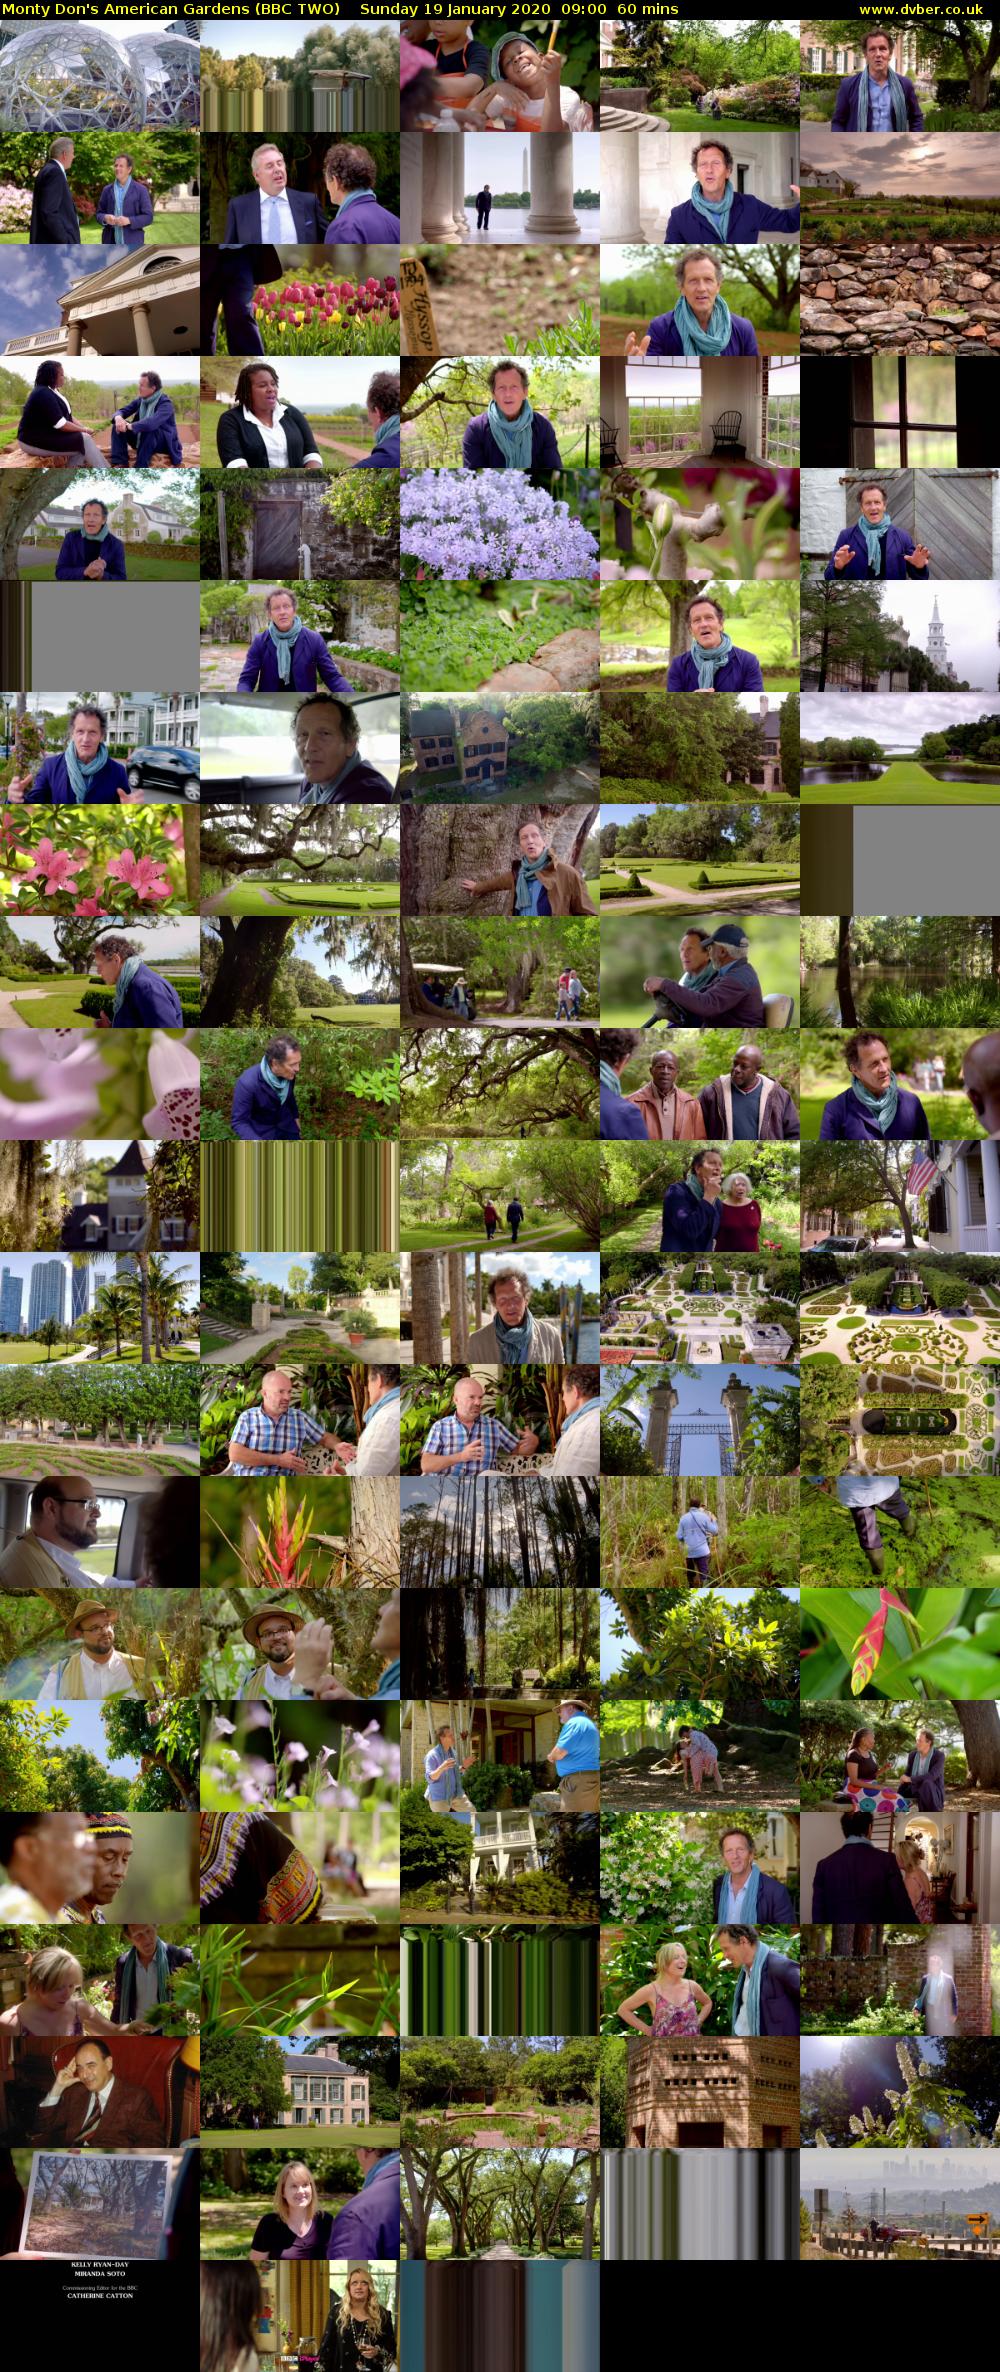 Monty Don's American Gardens (BBC TWO) Sunday 19 January 2020 09:00 - 10:00